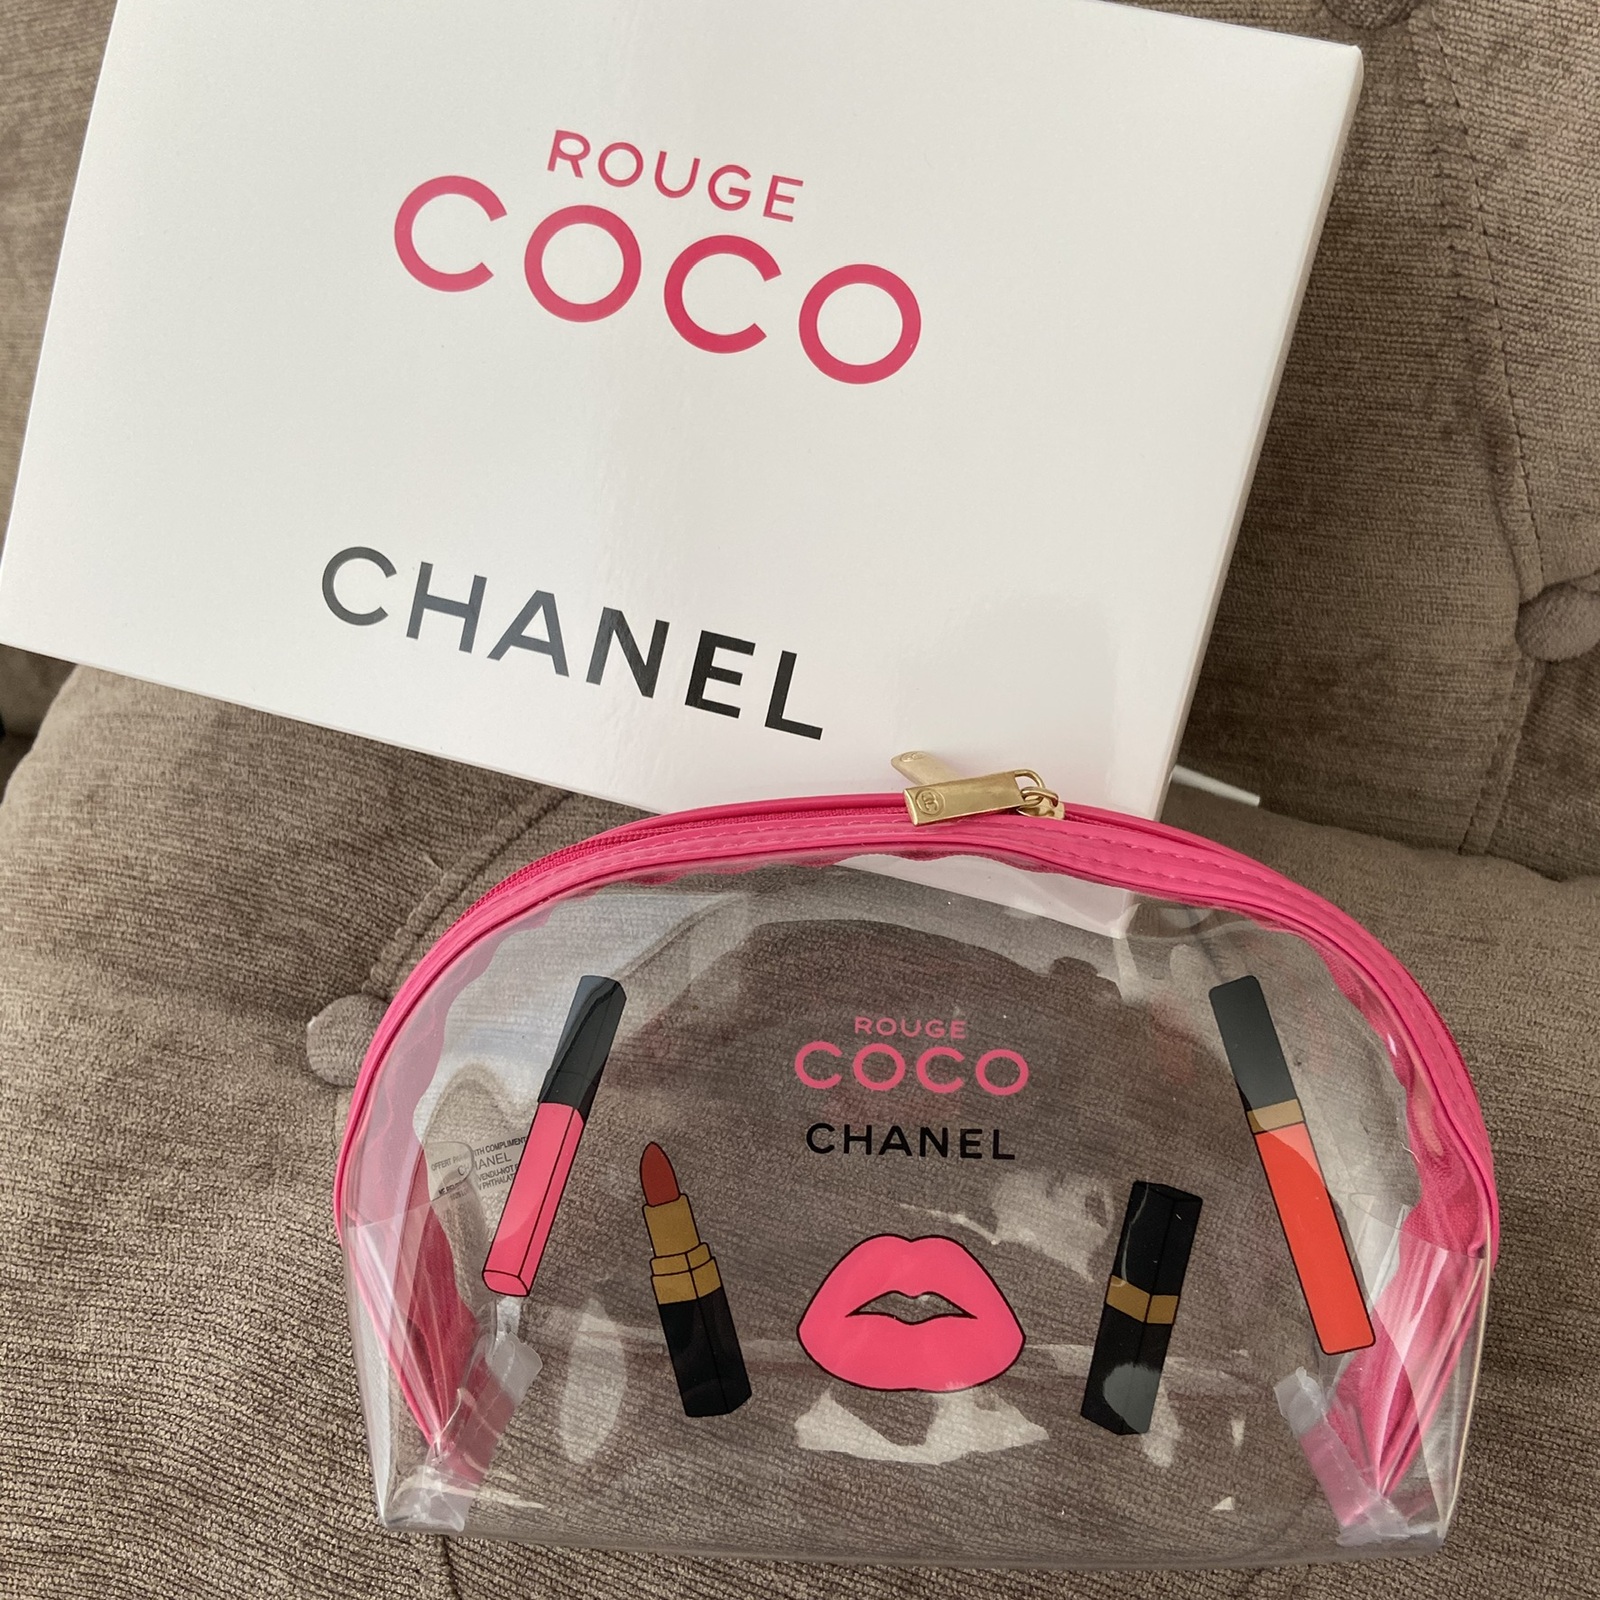 Chanel CoCo Makeup Bag Pouch Case Gift Box and 15 similar items